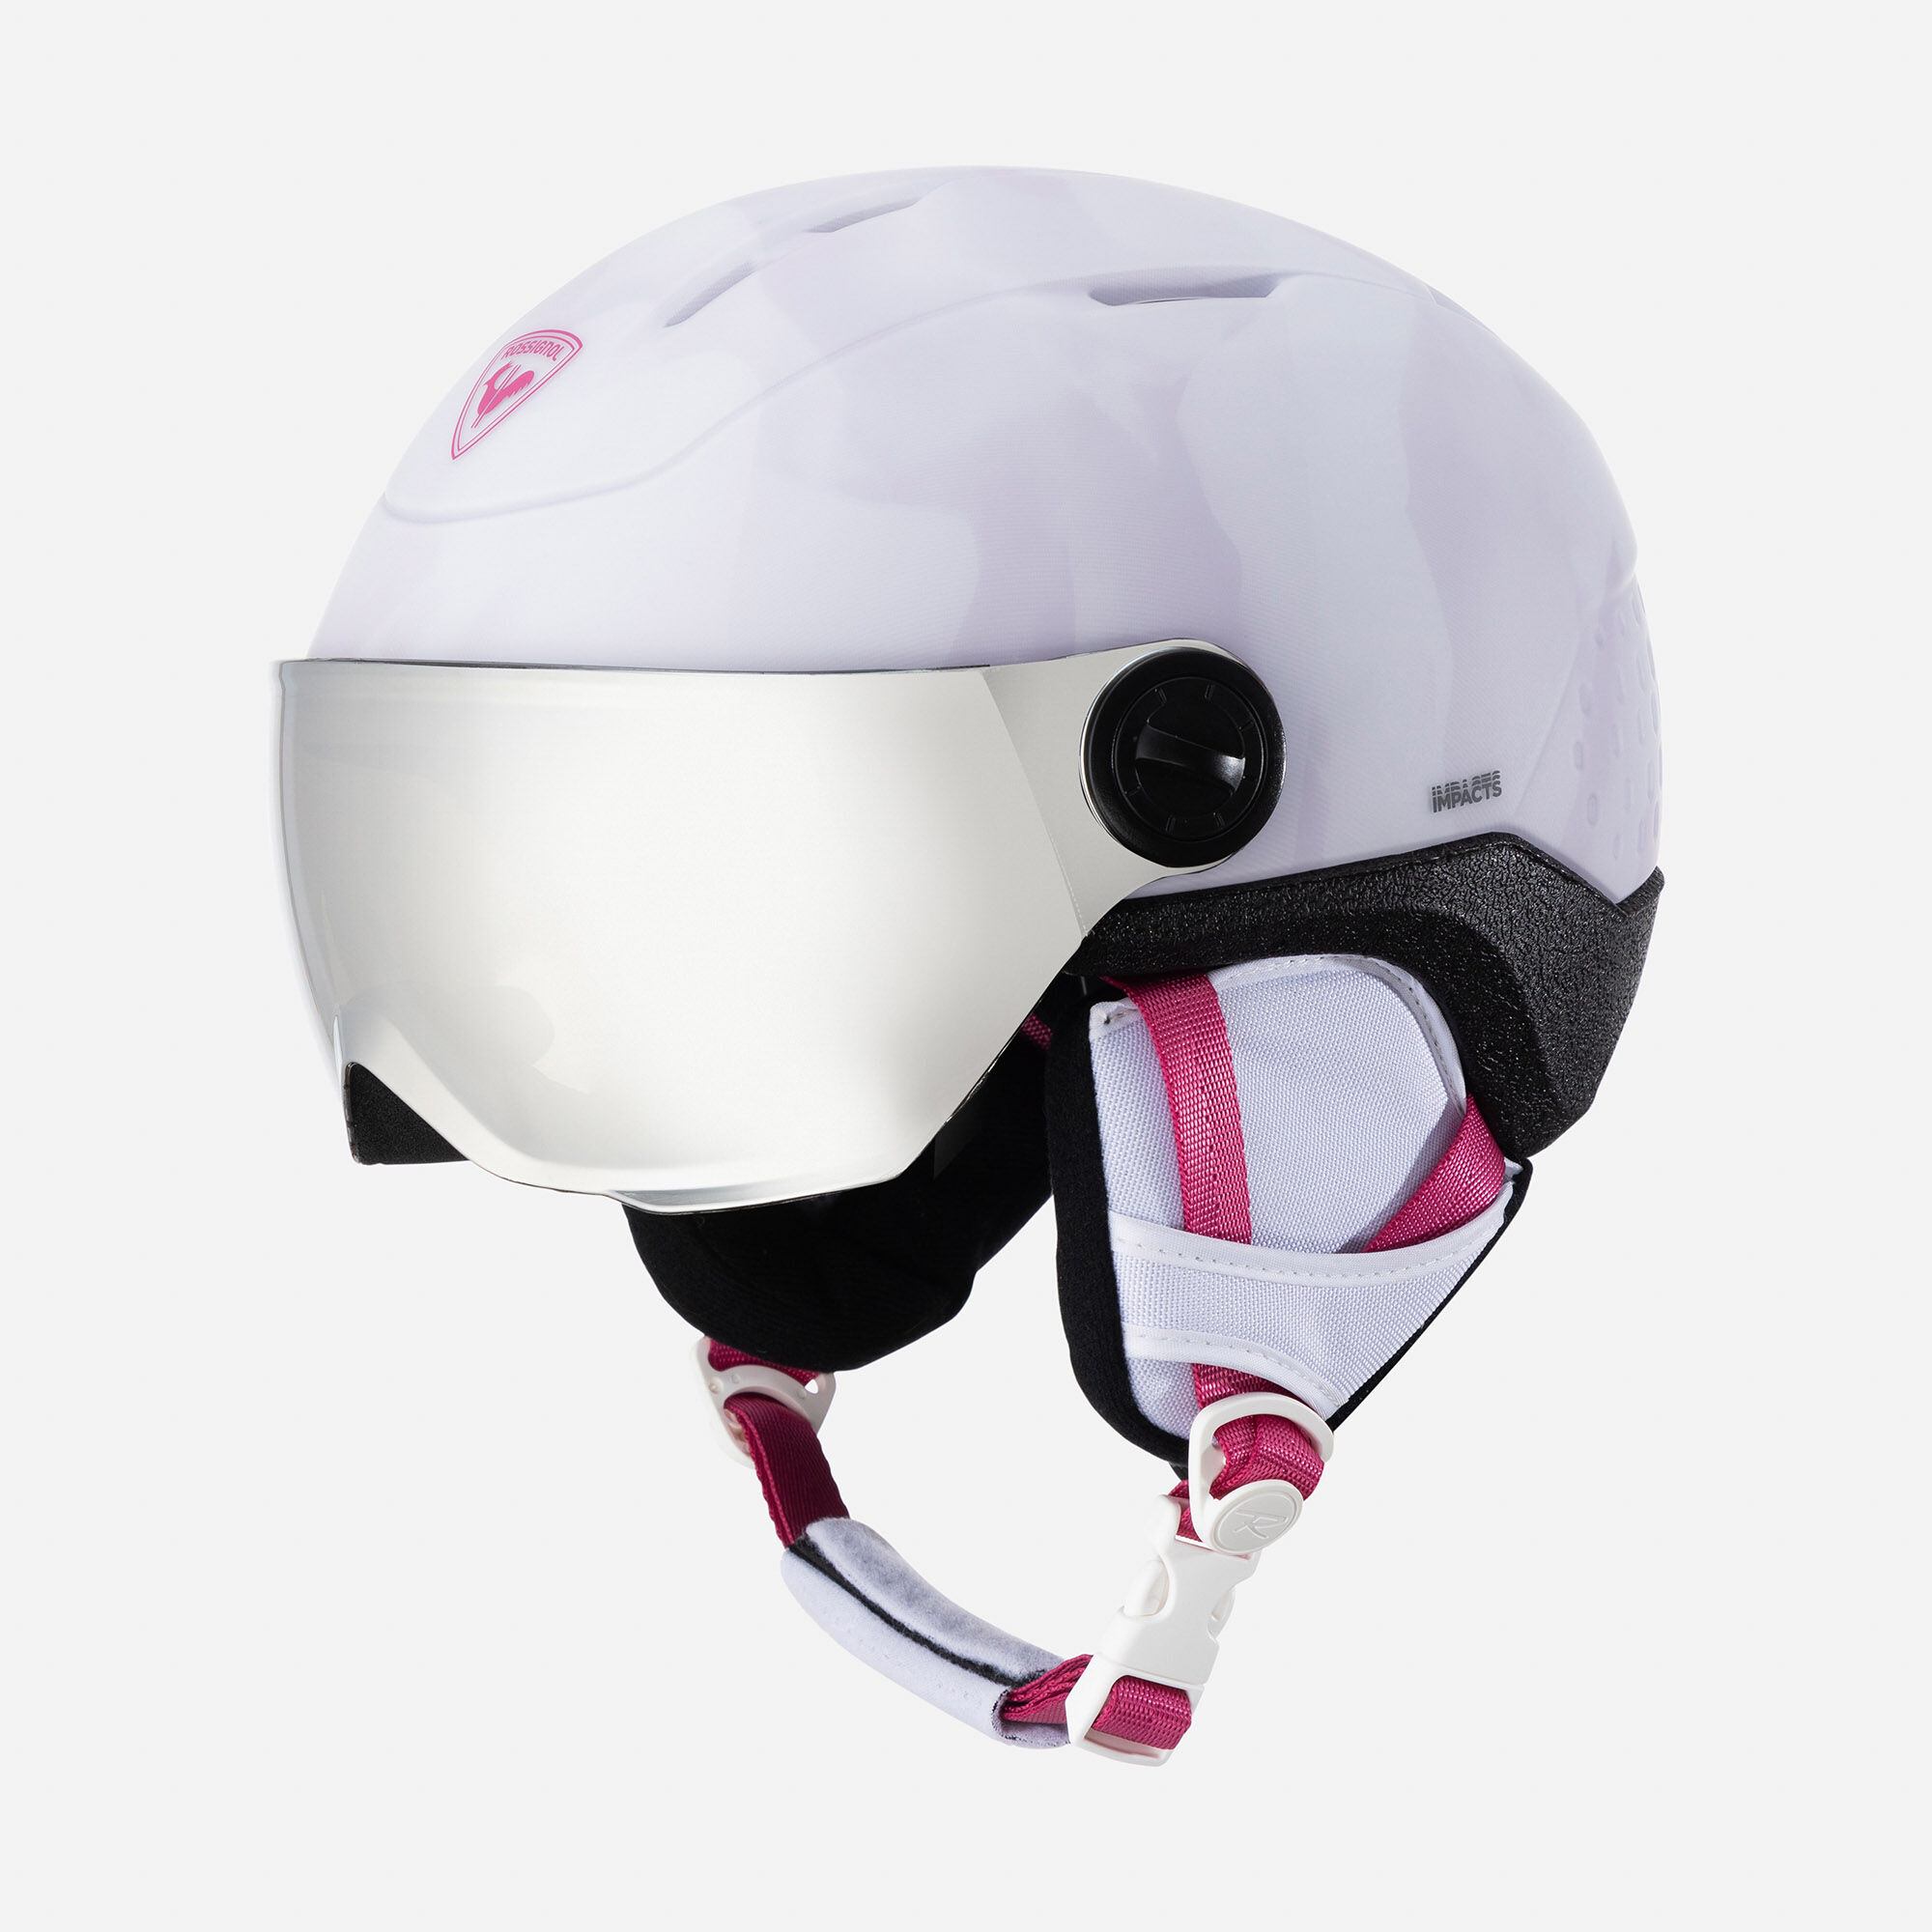 WHOOPEE VISOR WHITE | Helmets & protections | Rossignol